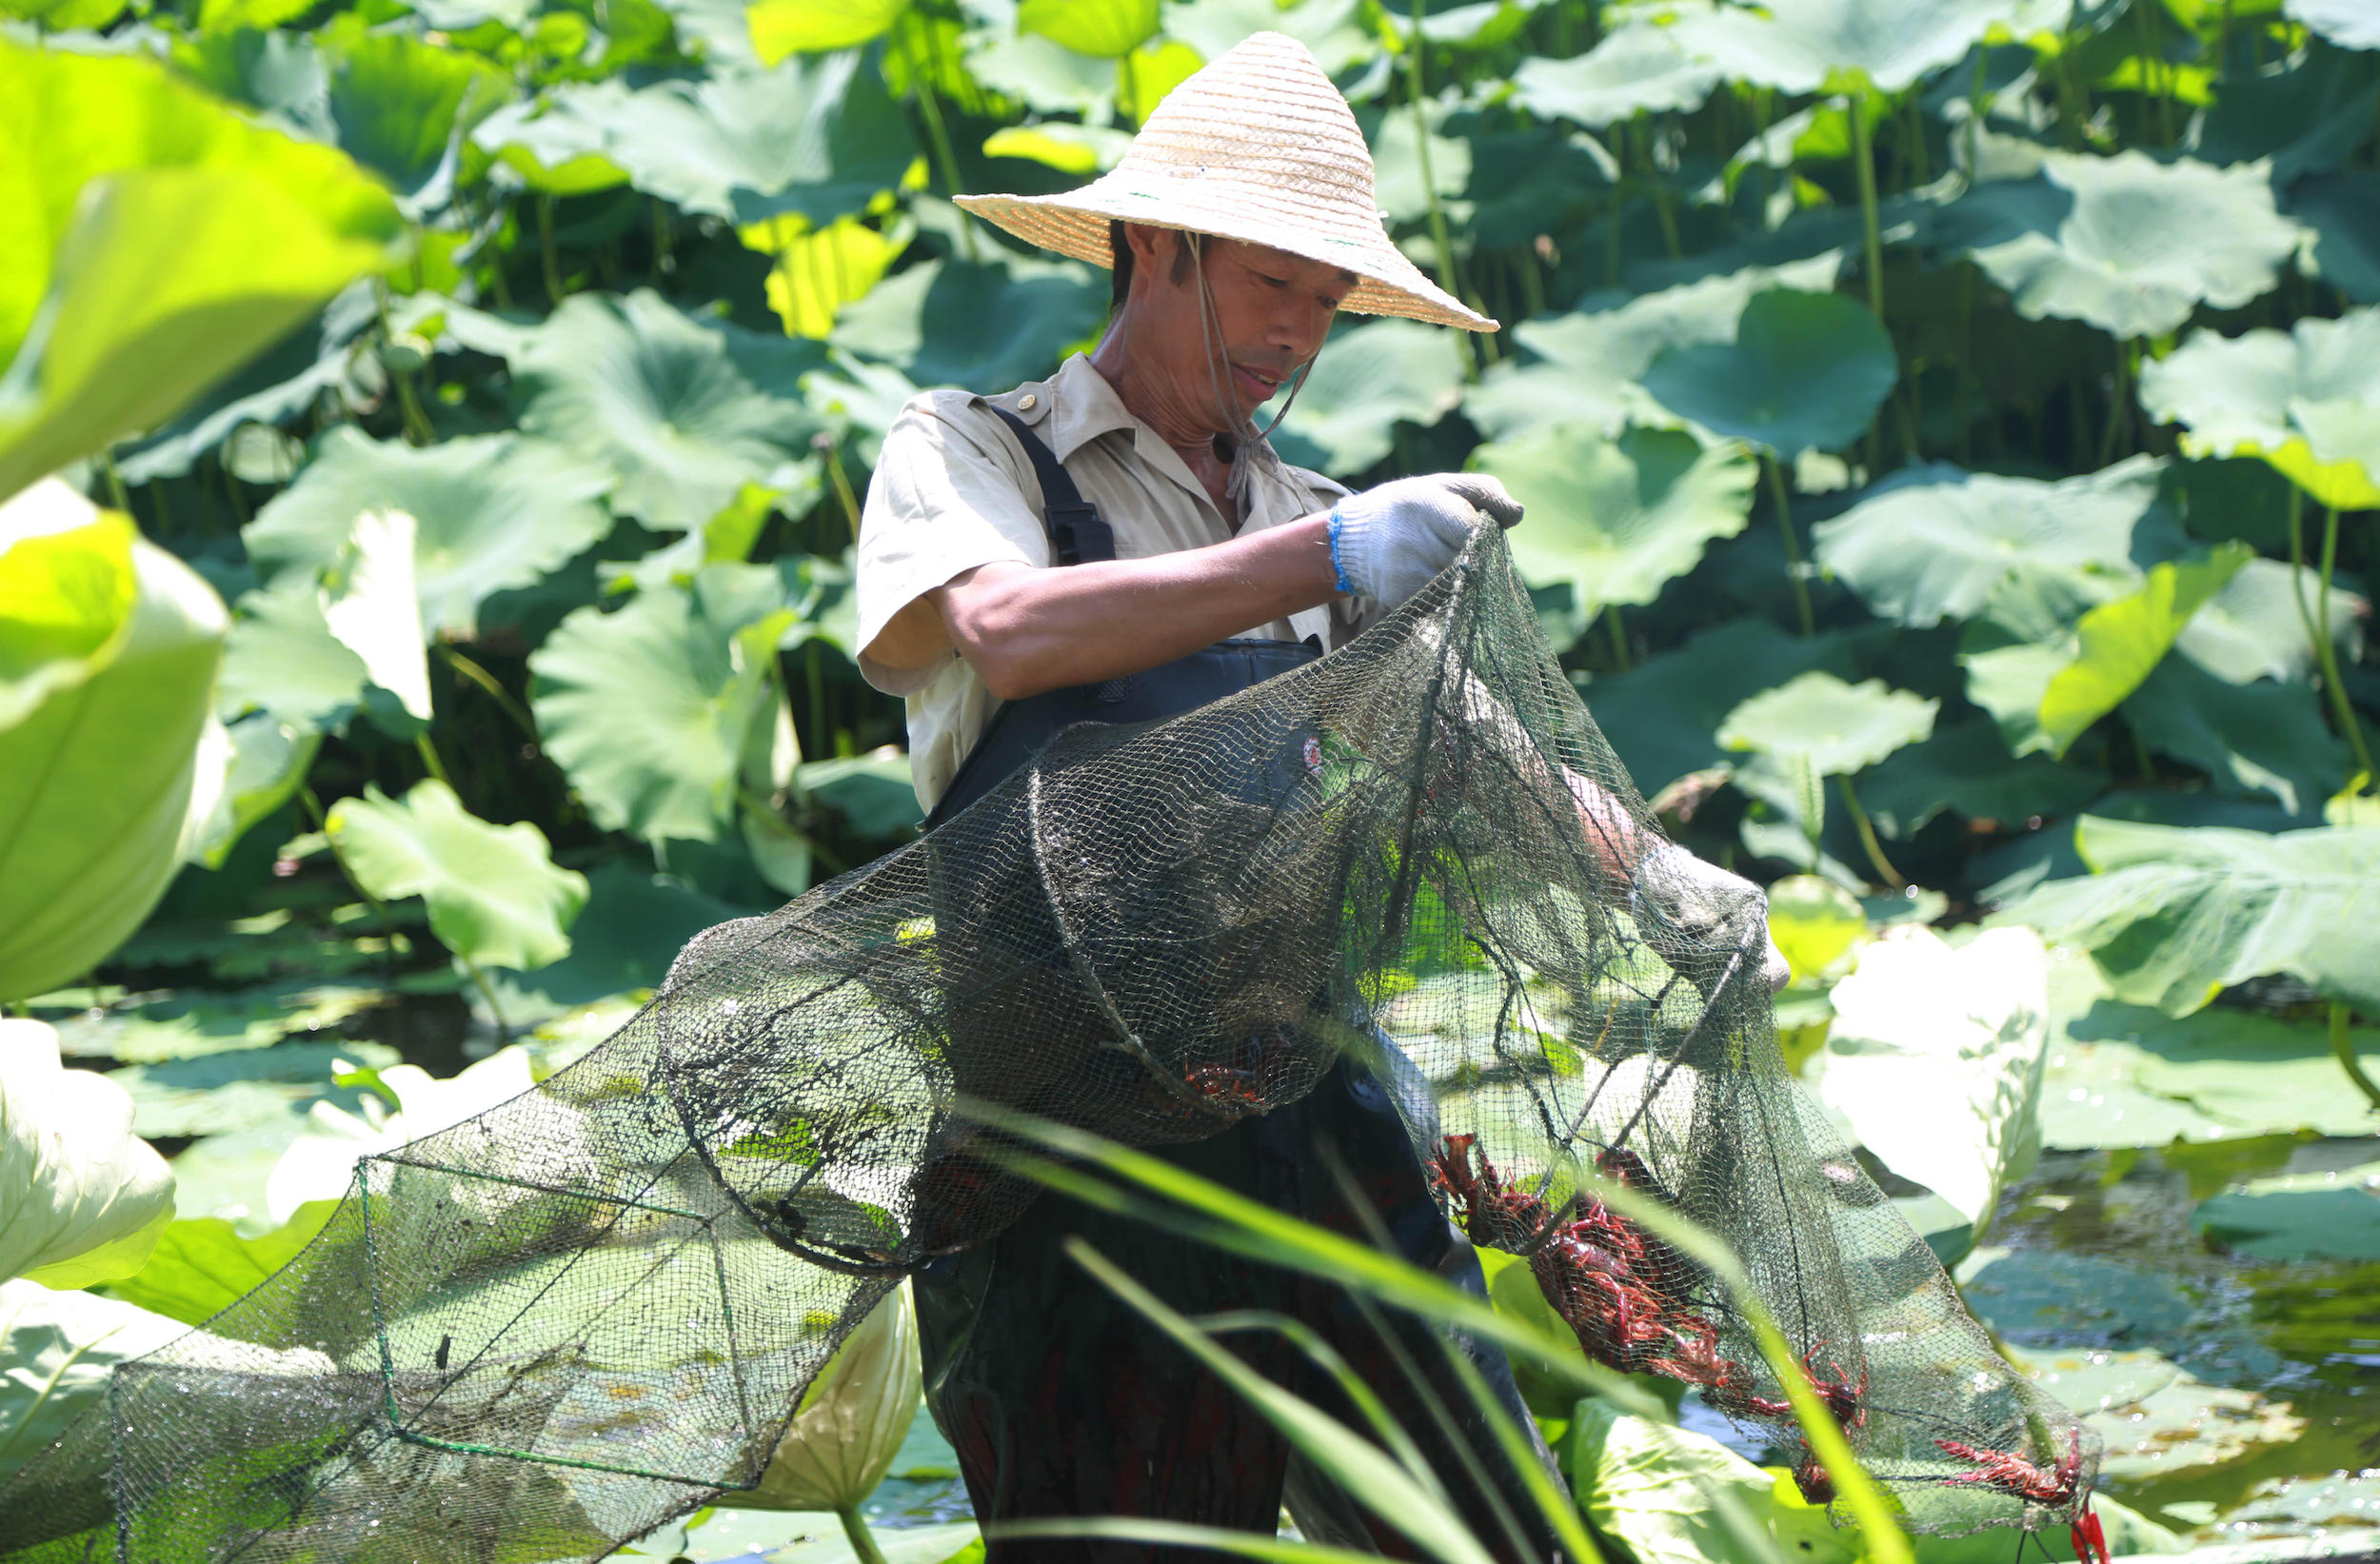 example of ecological aquaculture, a villager collects crayfish from a lotus pond